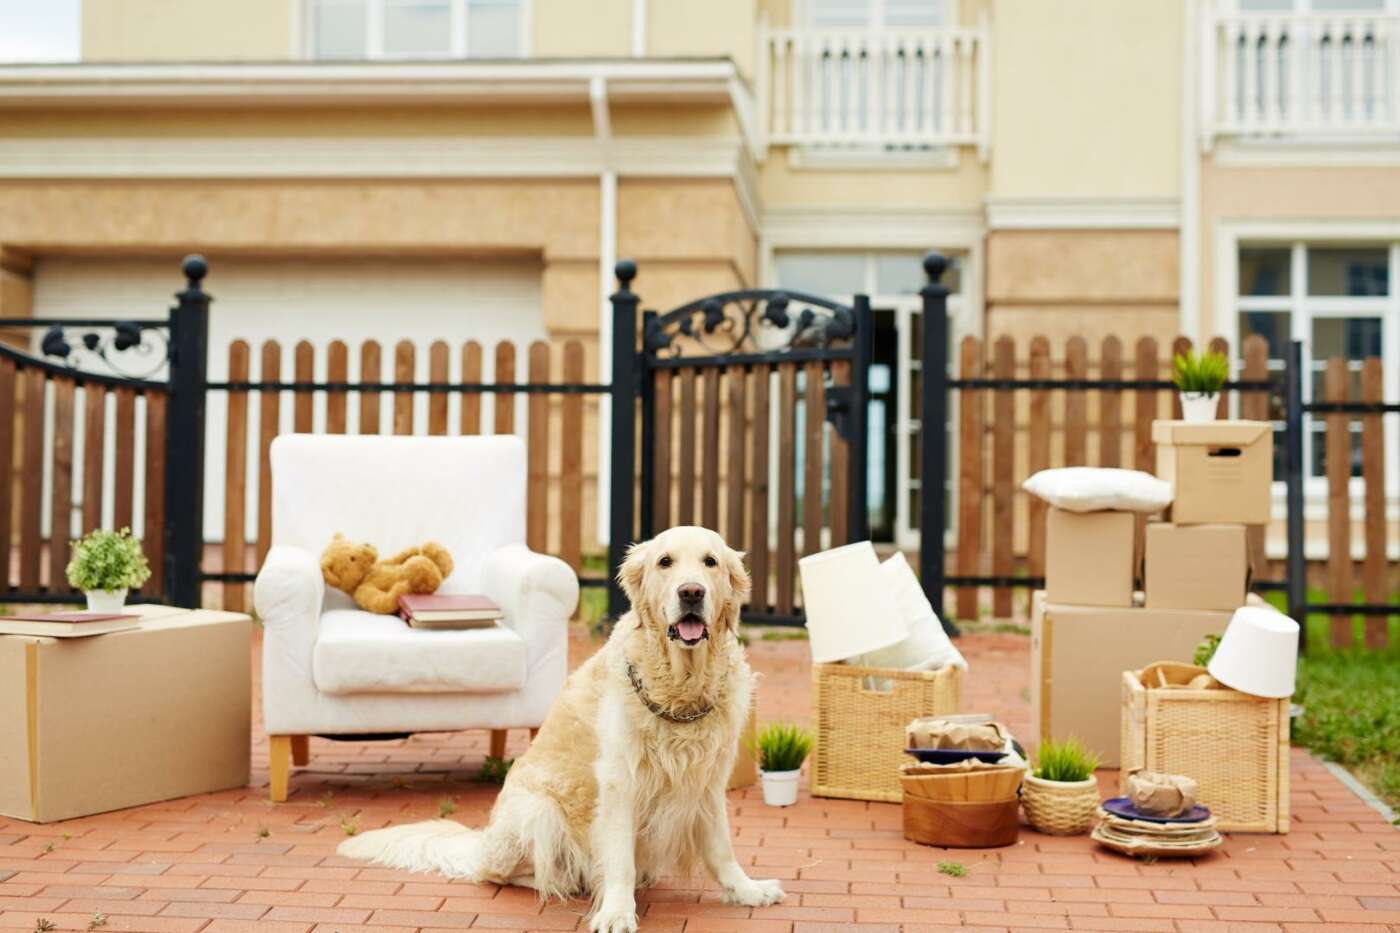 Tips For Moving with Dogs and Cats 7ee9d49f12c2c54072a3af9d7c9c4b07a3b195af